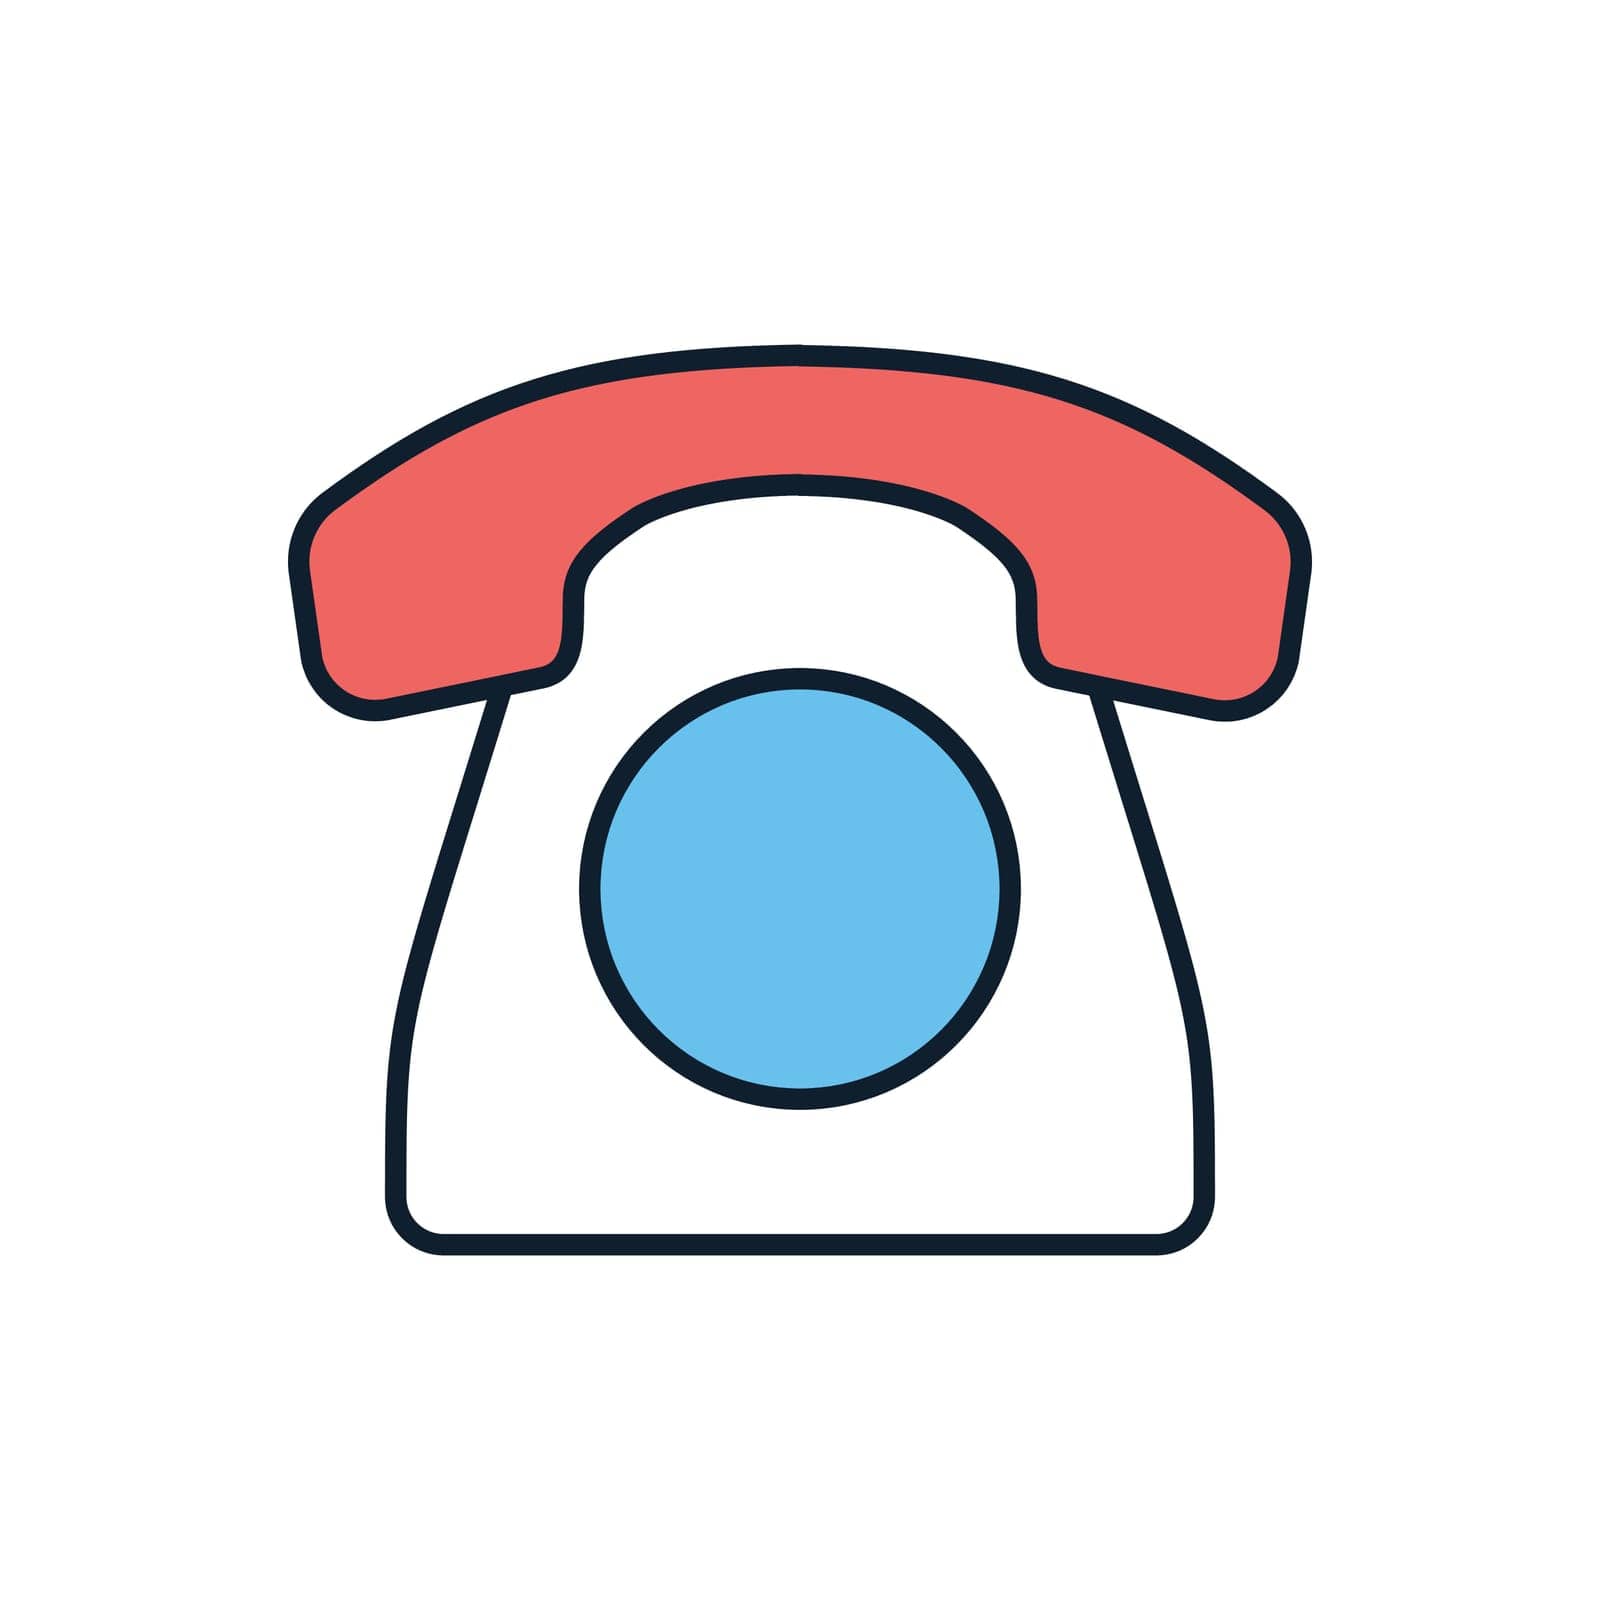 Vintage Phone related vector icon. Isolated on white background. Vector illustration